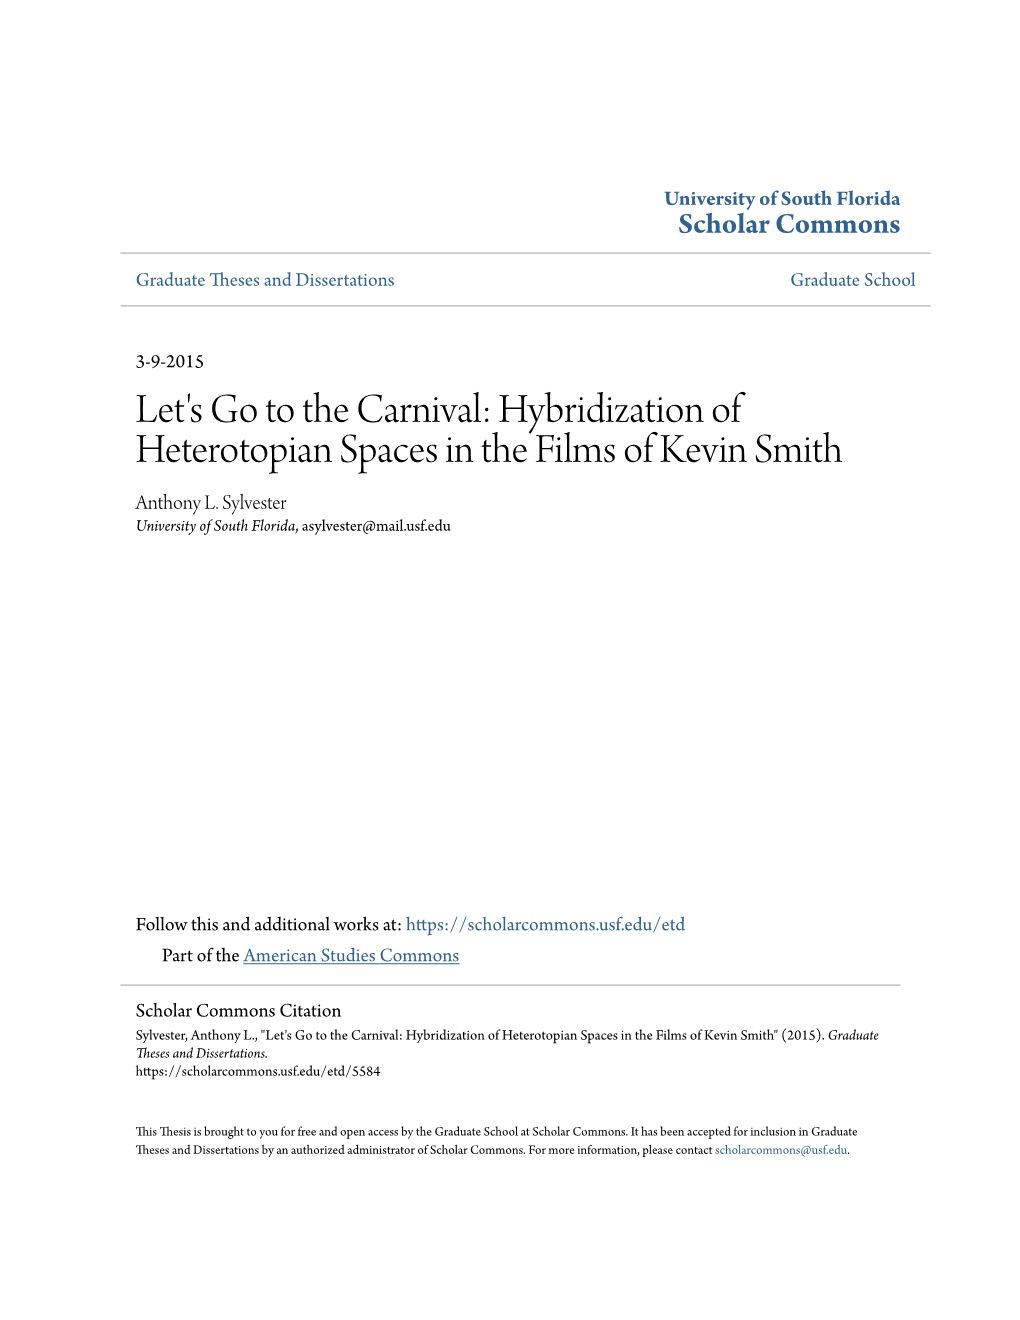 Let's Go to the Carnival: Hybridization of Heterotopian Spaces in the Films of Kevin Smith Anthony L